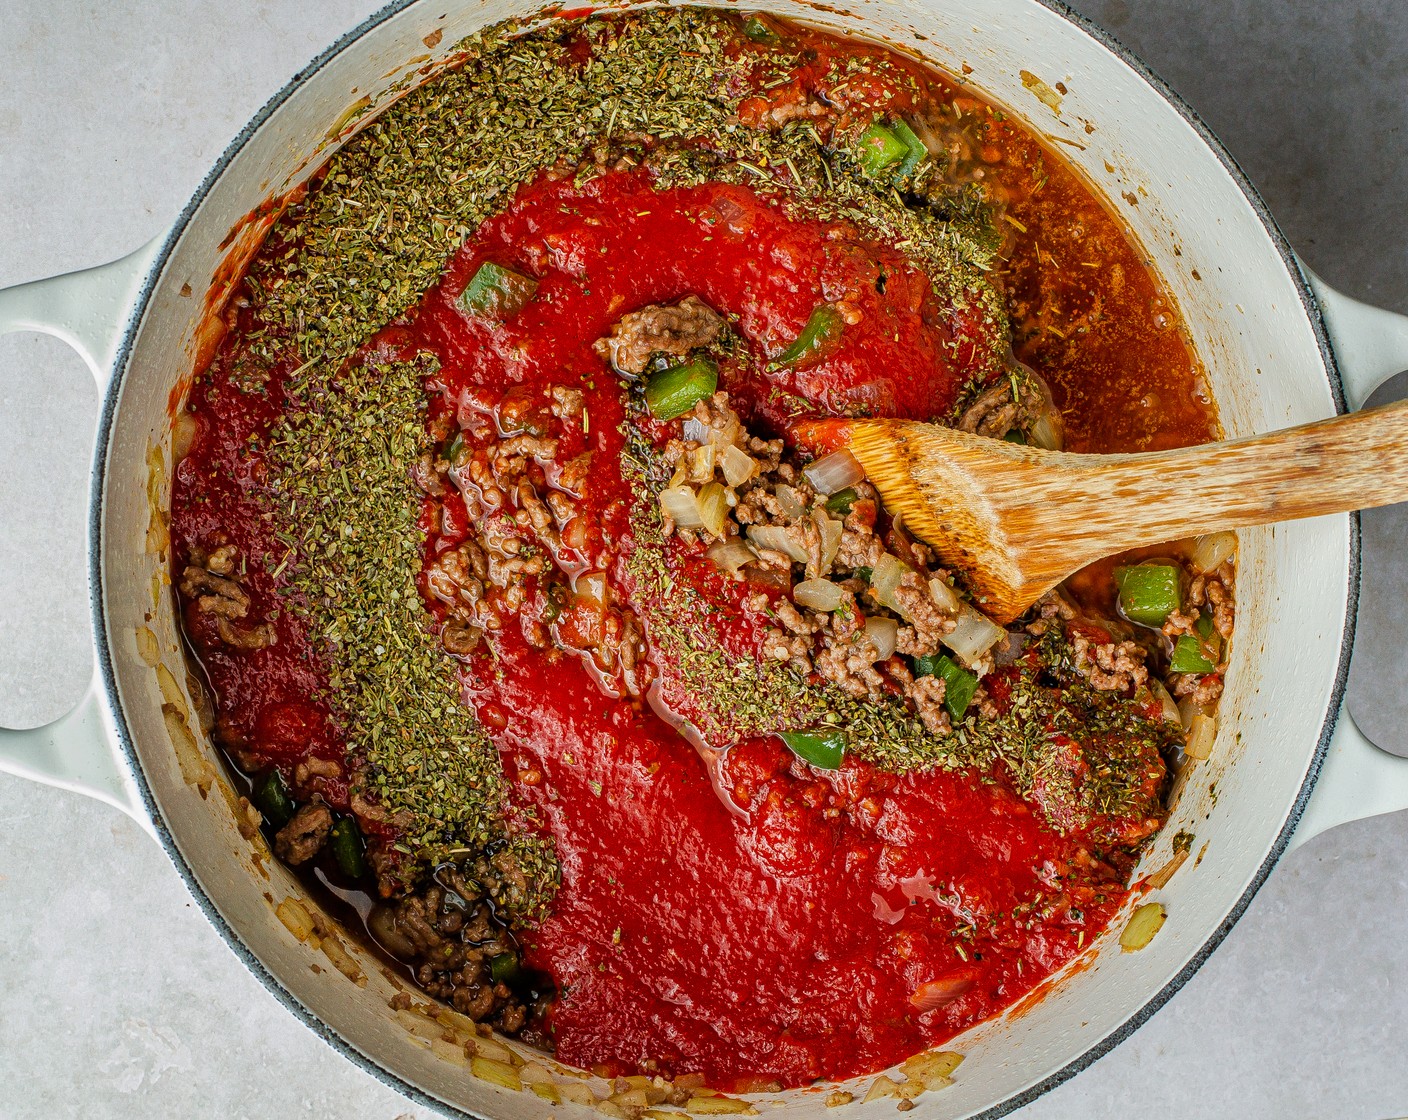 step 5 Add Garlic (4 cloves), Italian Seasoning (1 Tbsp), Seasoned Salt (1/2 Tbsp), Tomato Sauce (1 can), Crushed Tomatoes (1 can), Ground Black Pepper (1 tsp), and Granulated Sugar (1/2 Tbsp). Cook for 6 minutes until the sauce begins to bubble. Taste and adjust seasoning.